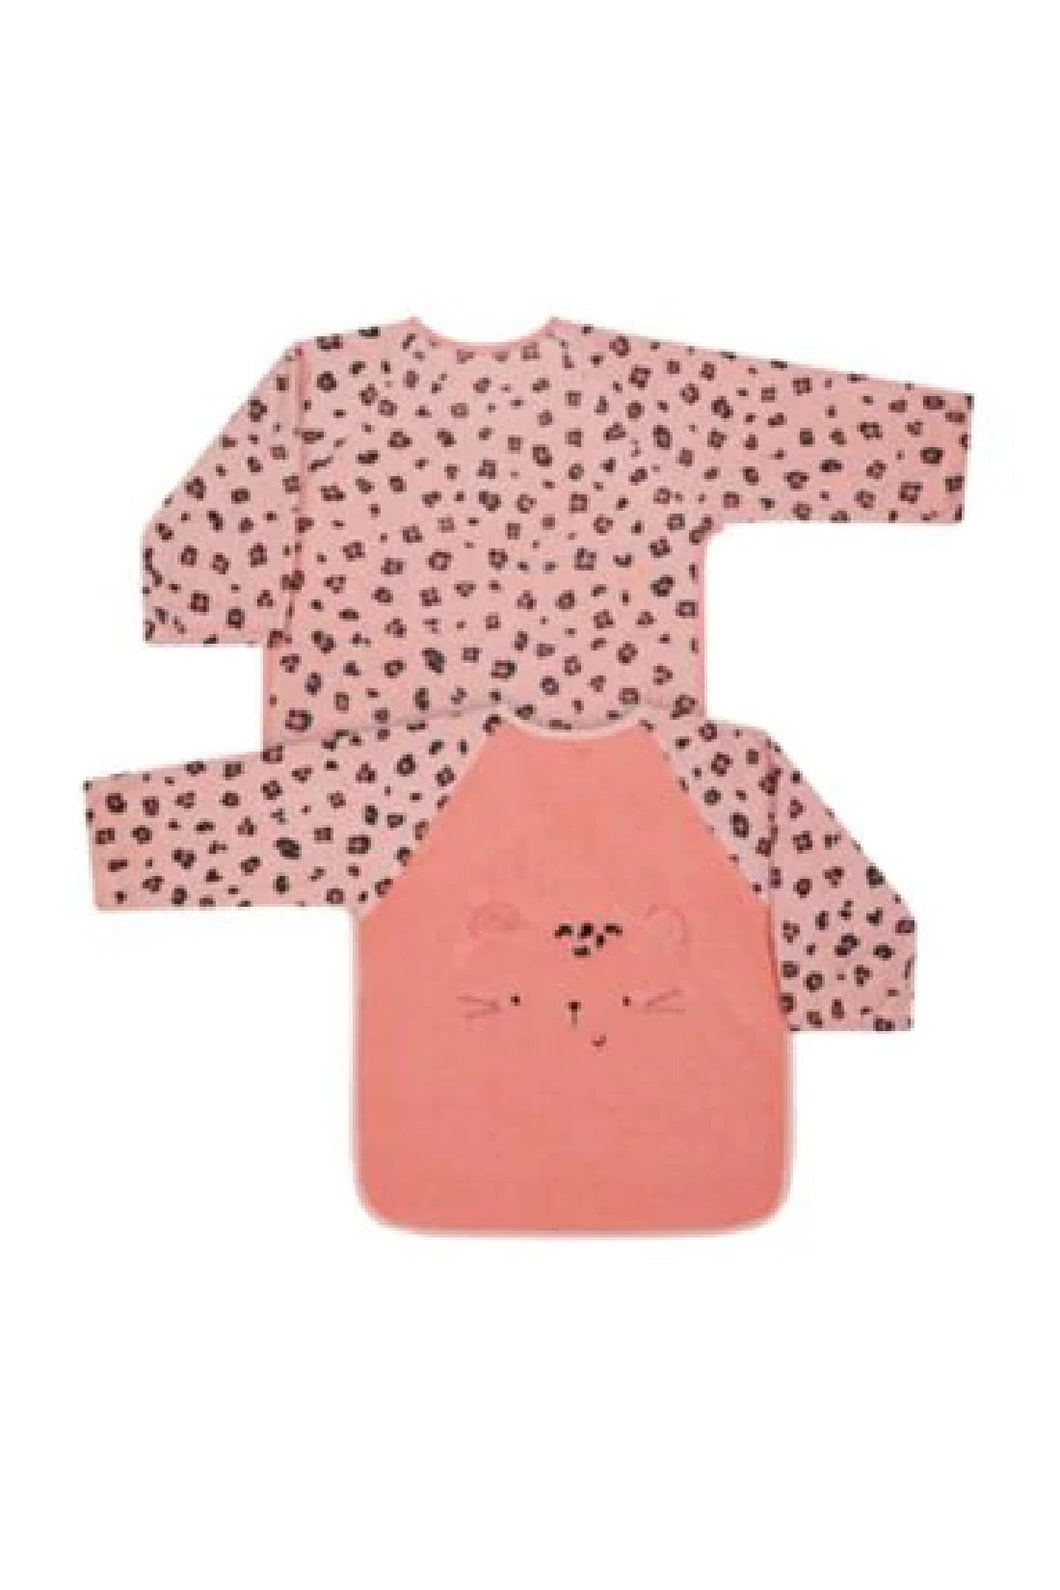 Mothercare Pink Cat Towelling Coverall Bibs 2 Pack 1